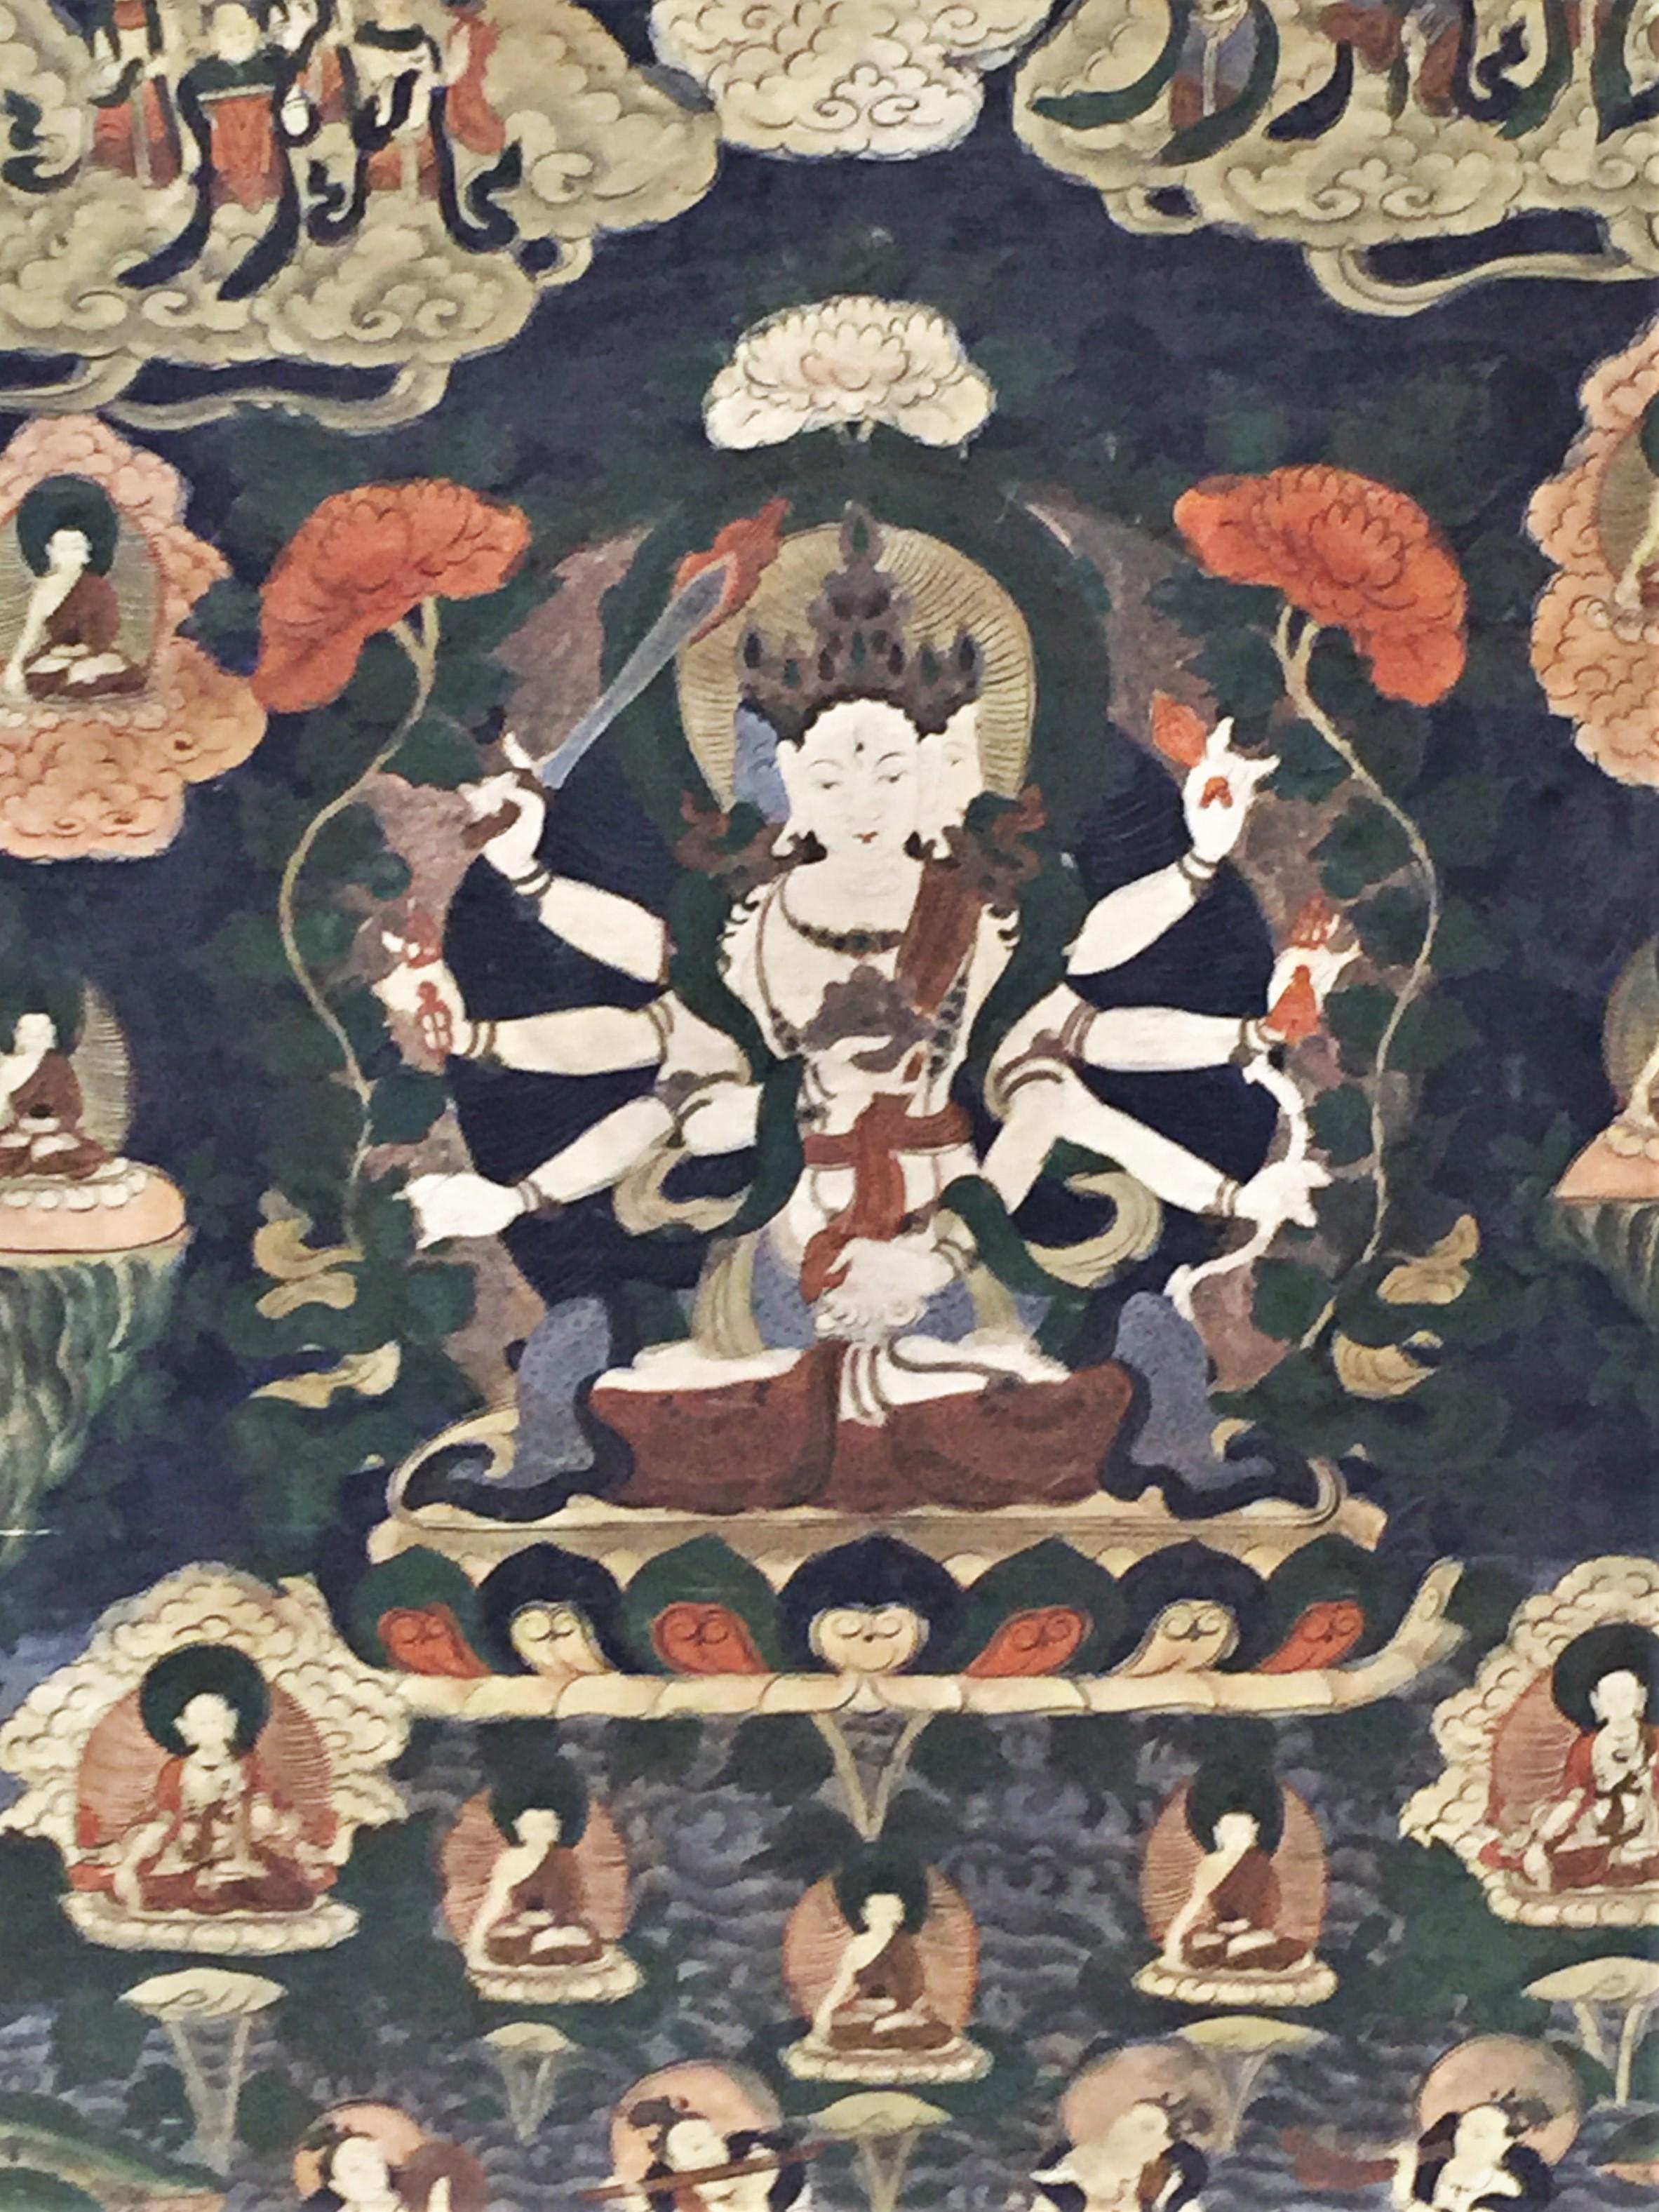 Rare! Unusually large for this type of Buddhist religious thangka art paintings, this 19th century work of art, depicting deeds of the most important Tibetan Buddhism deity, in all likelihood, served as a textbook in one of the Tibetan monasteries.